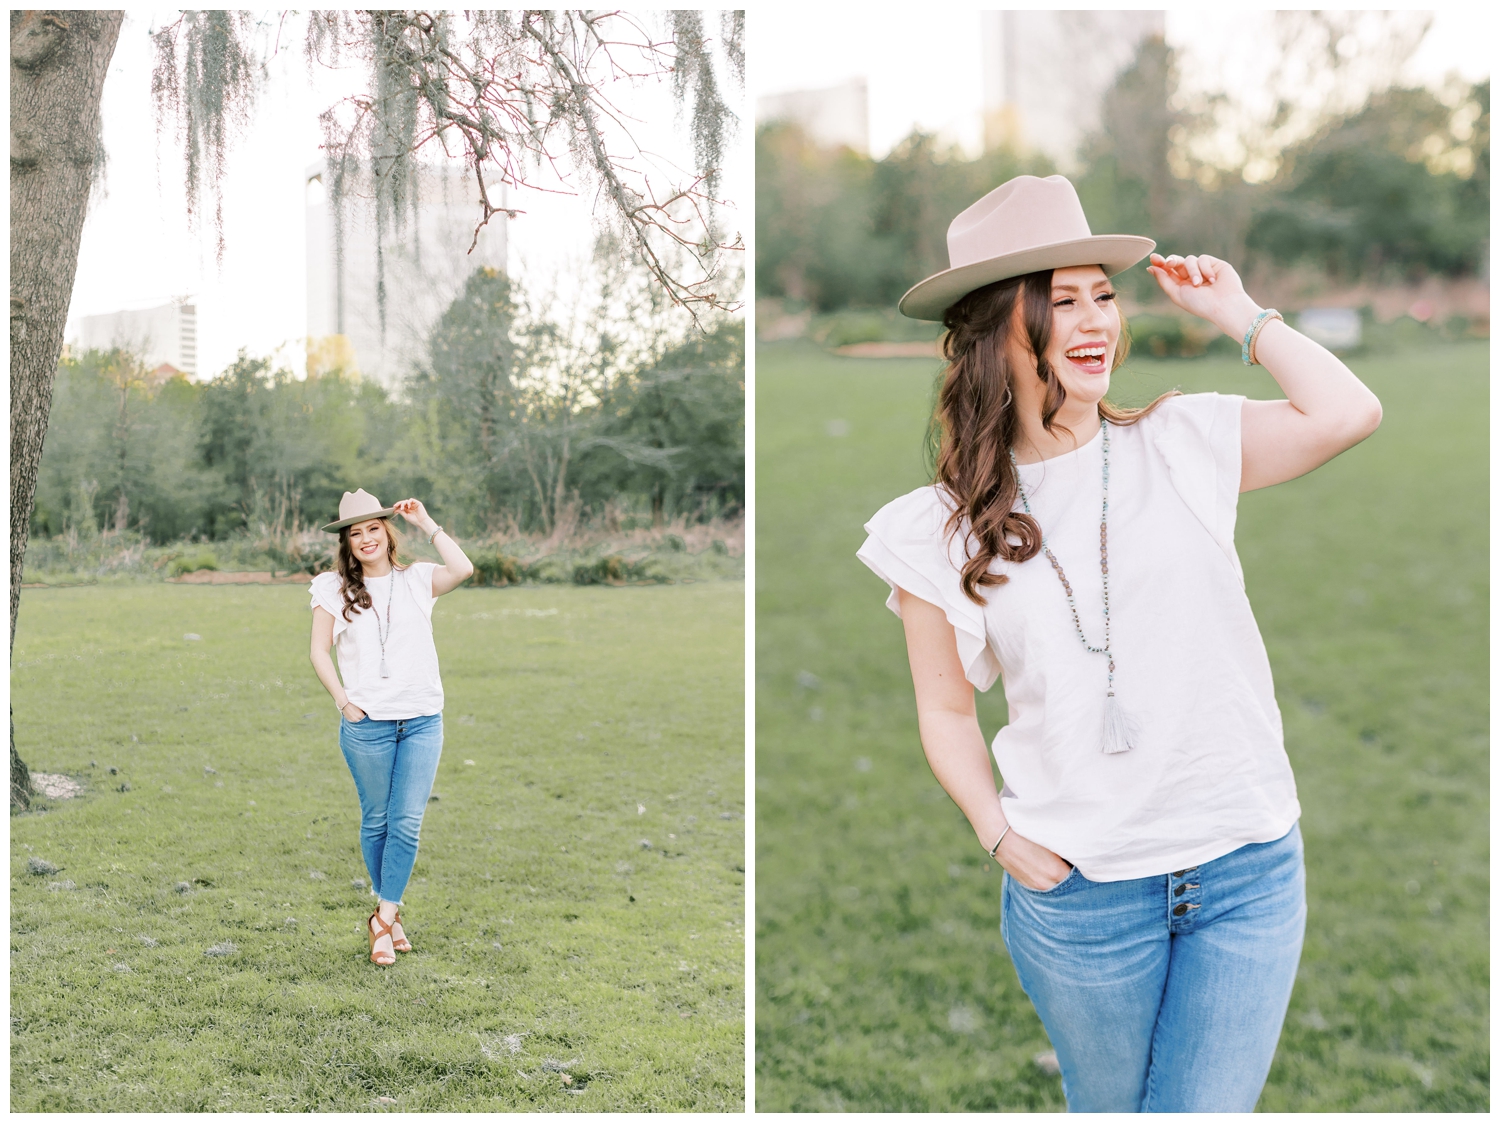 girl in white shirt and jeans with hat on laughing in a field